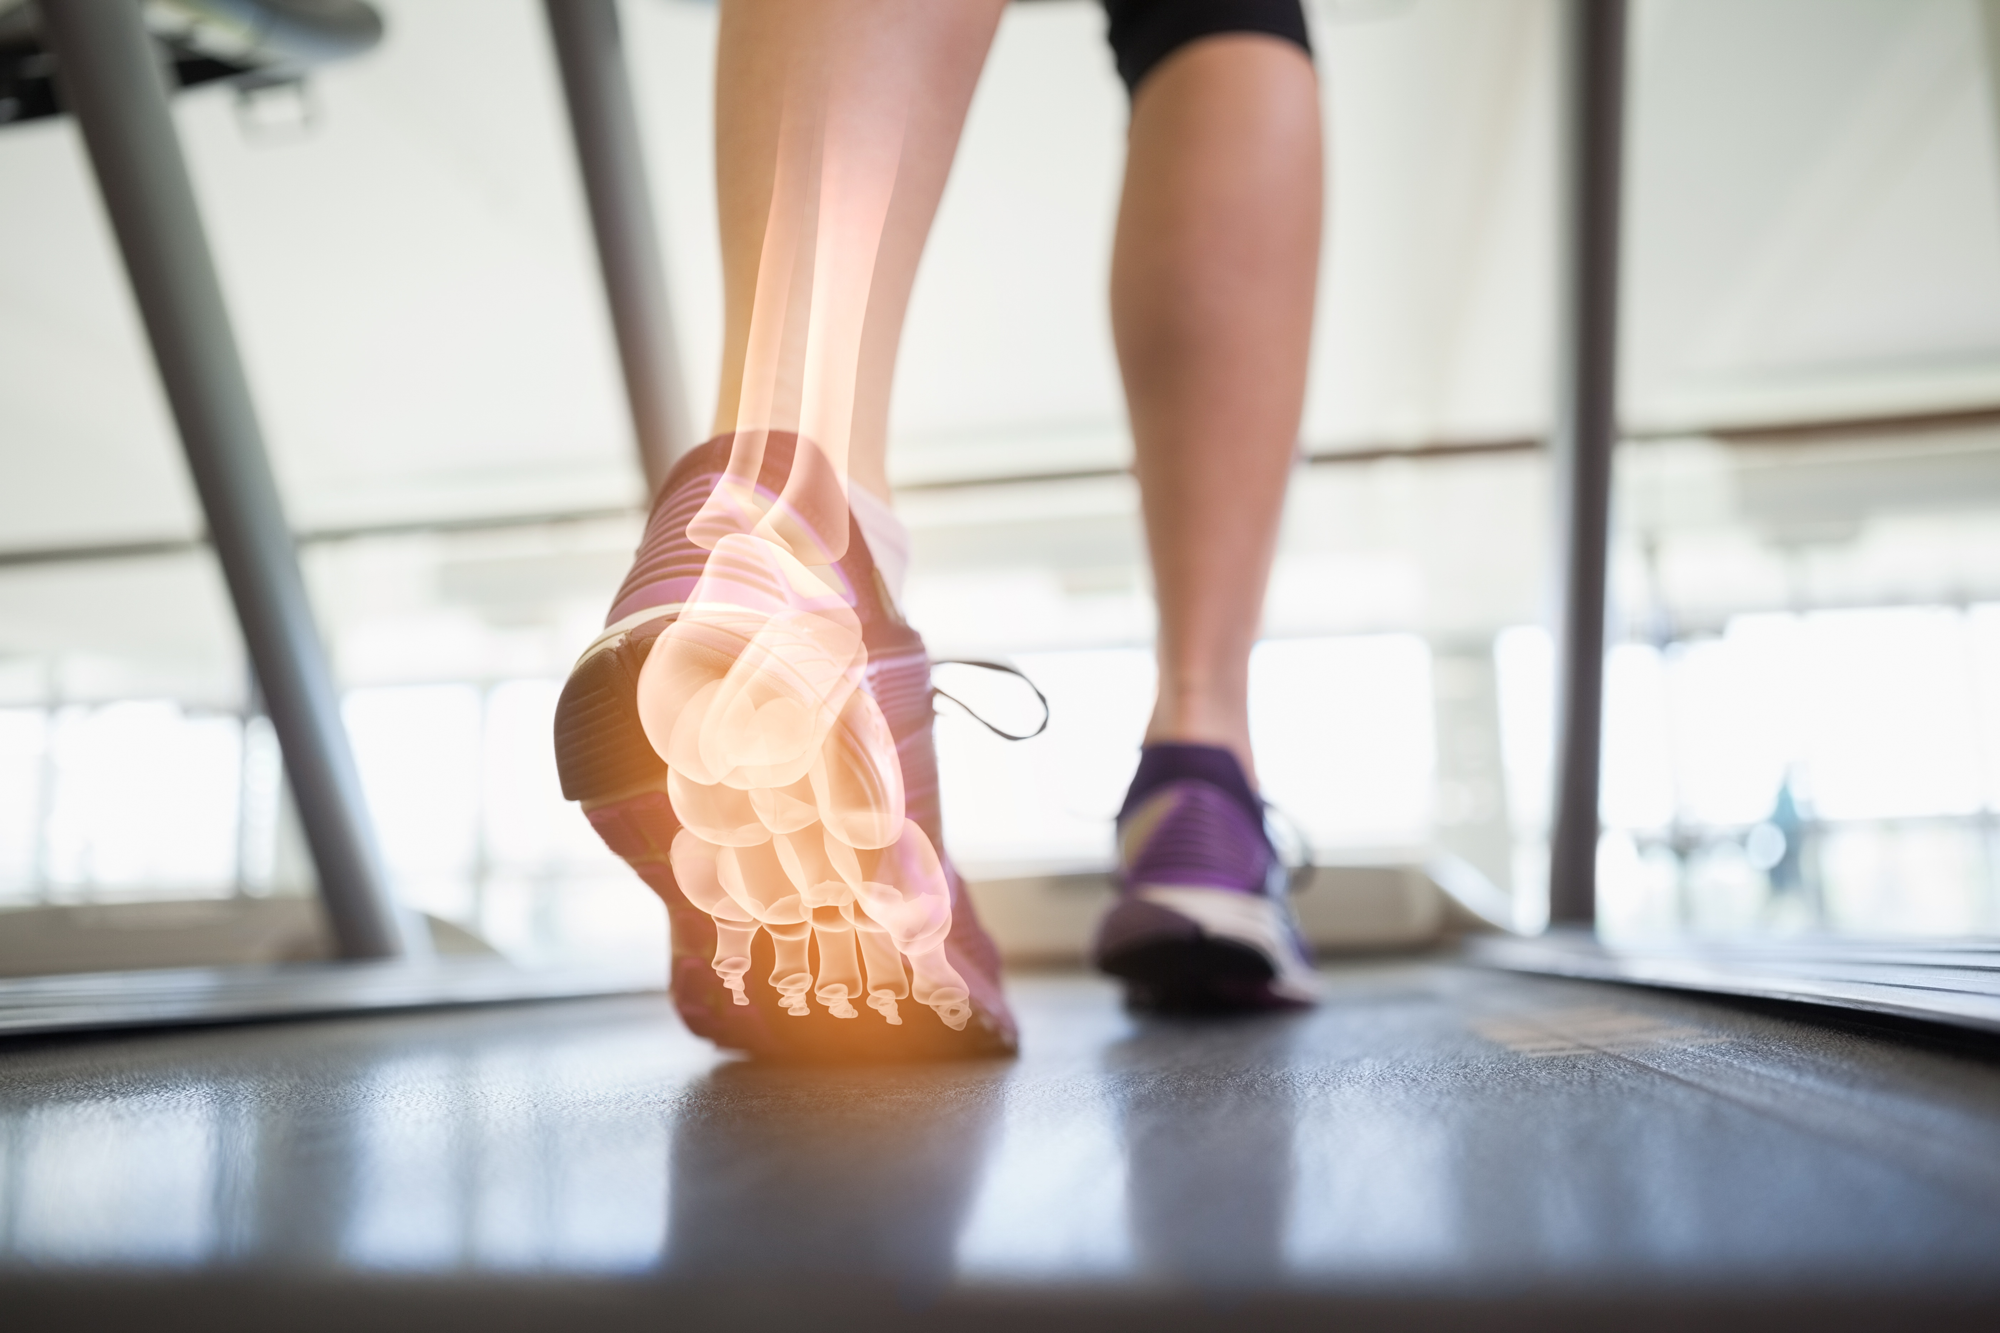  Ashtead Podiatry: Take Life In Your Stride   Read More  